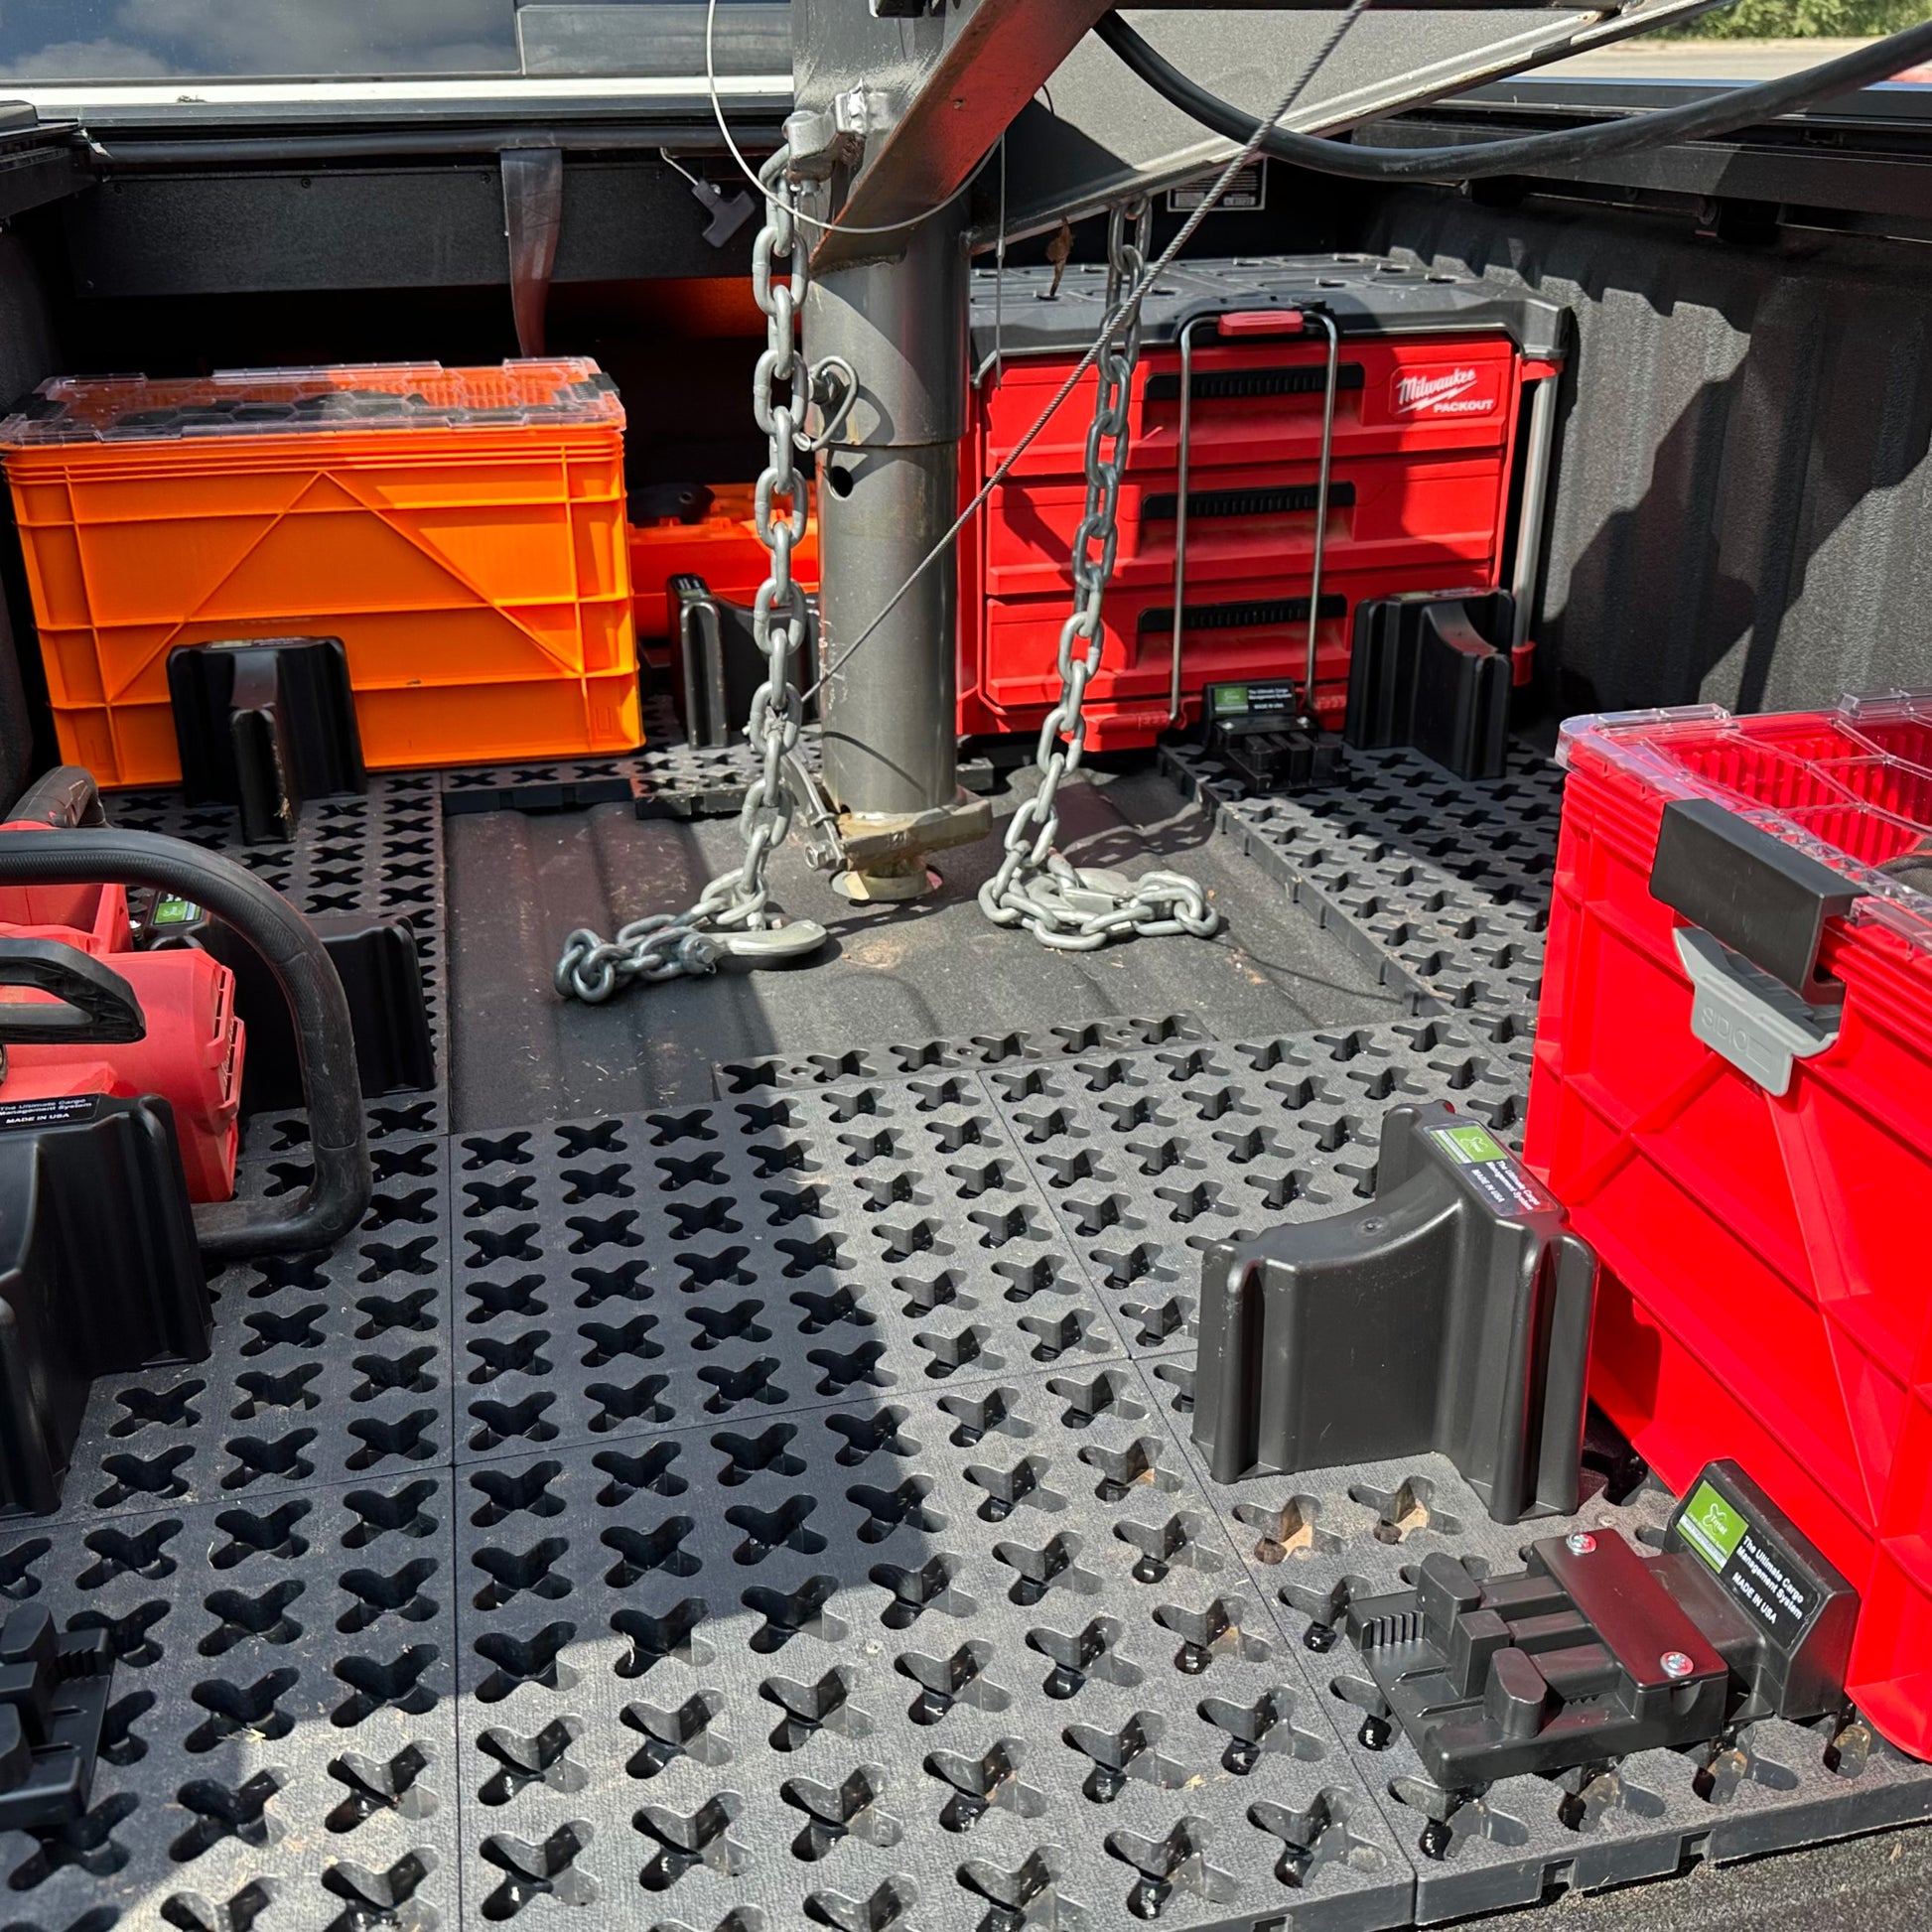 A chainsaw, Sidio storage crate, and red toolboxes secured in a truck bed with a gooseneck stock trailer attached.